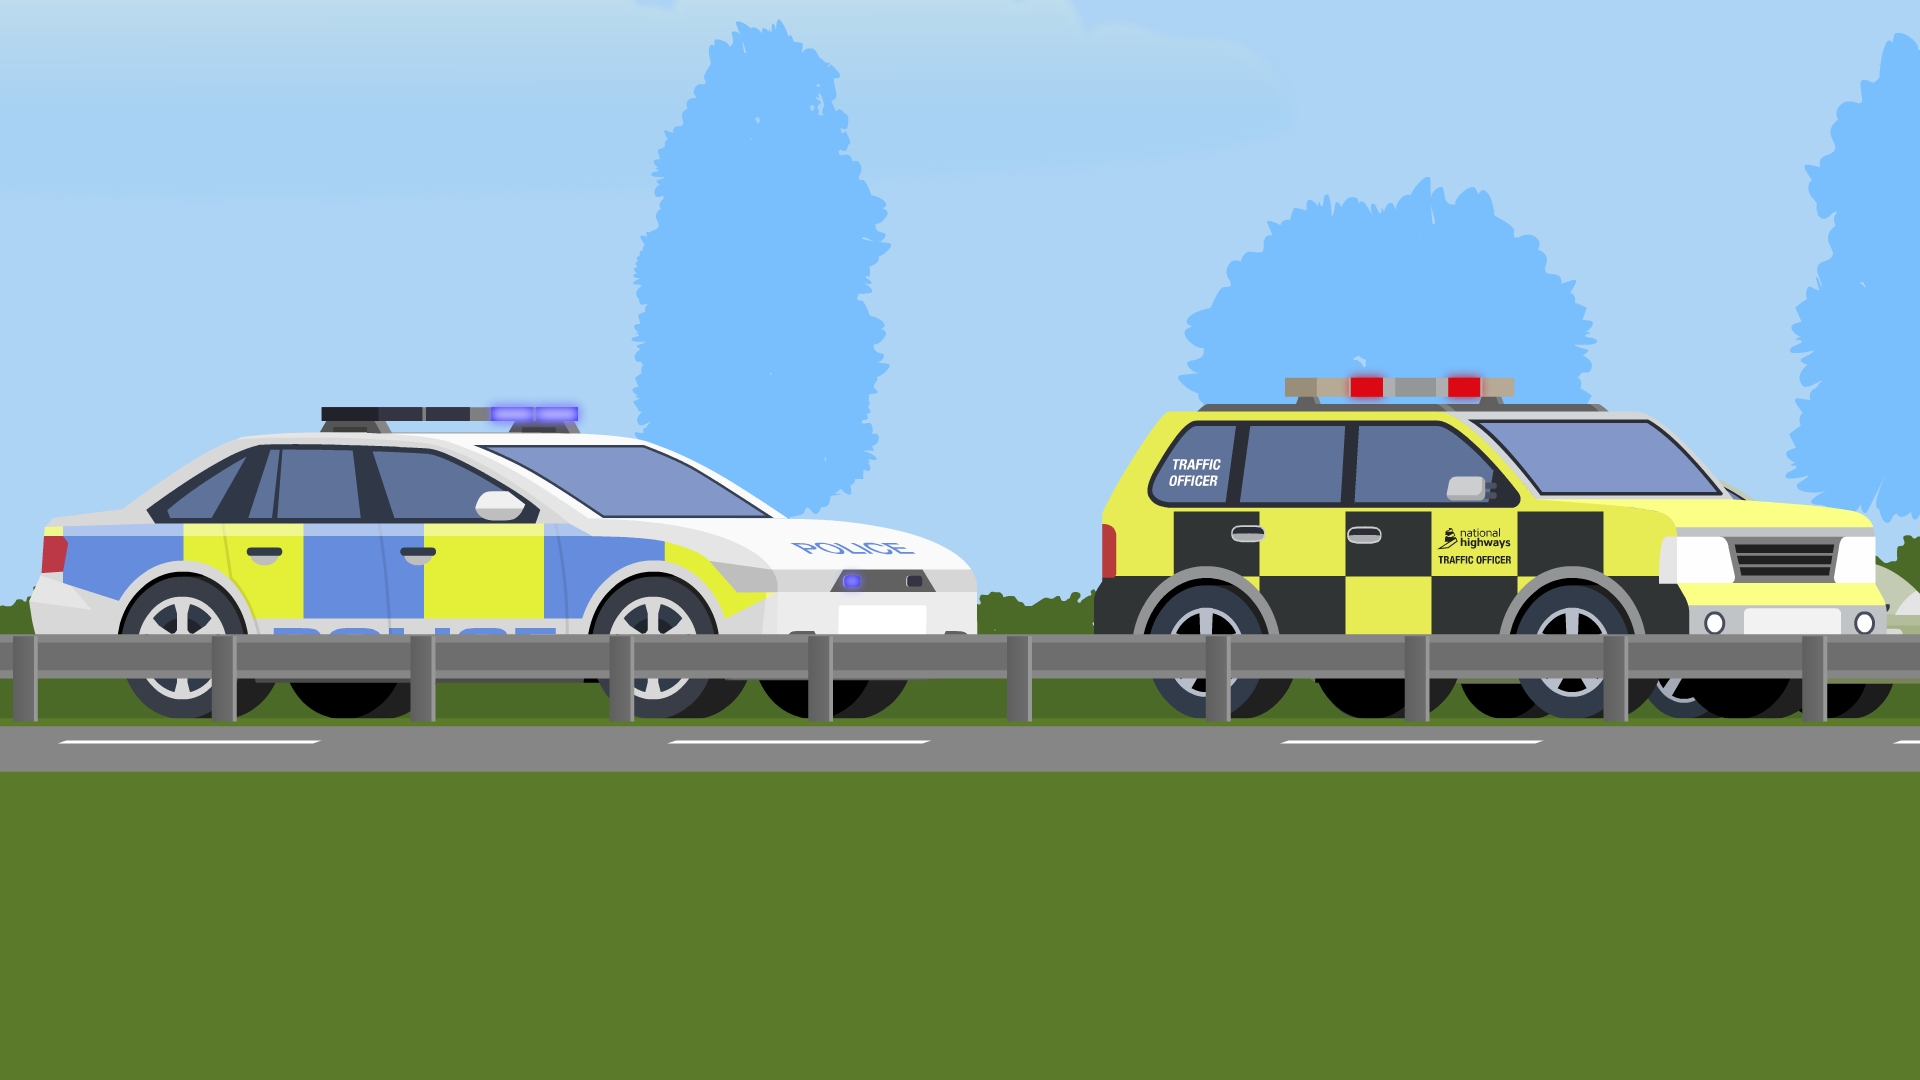 Illustration showing a police car and a National Highways Traffic Officer vehicle